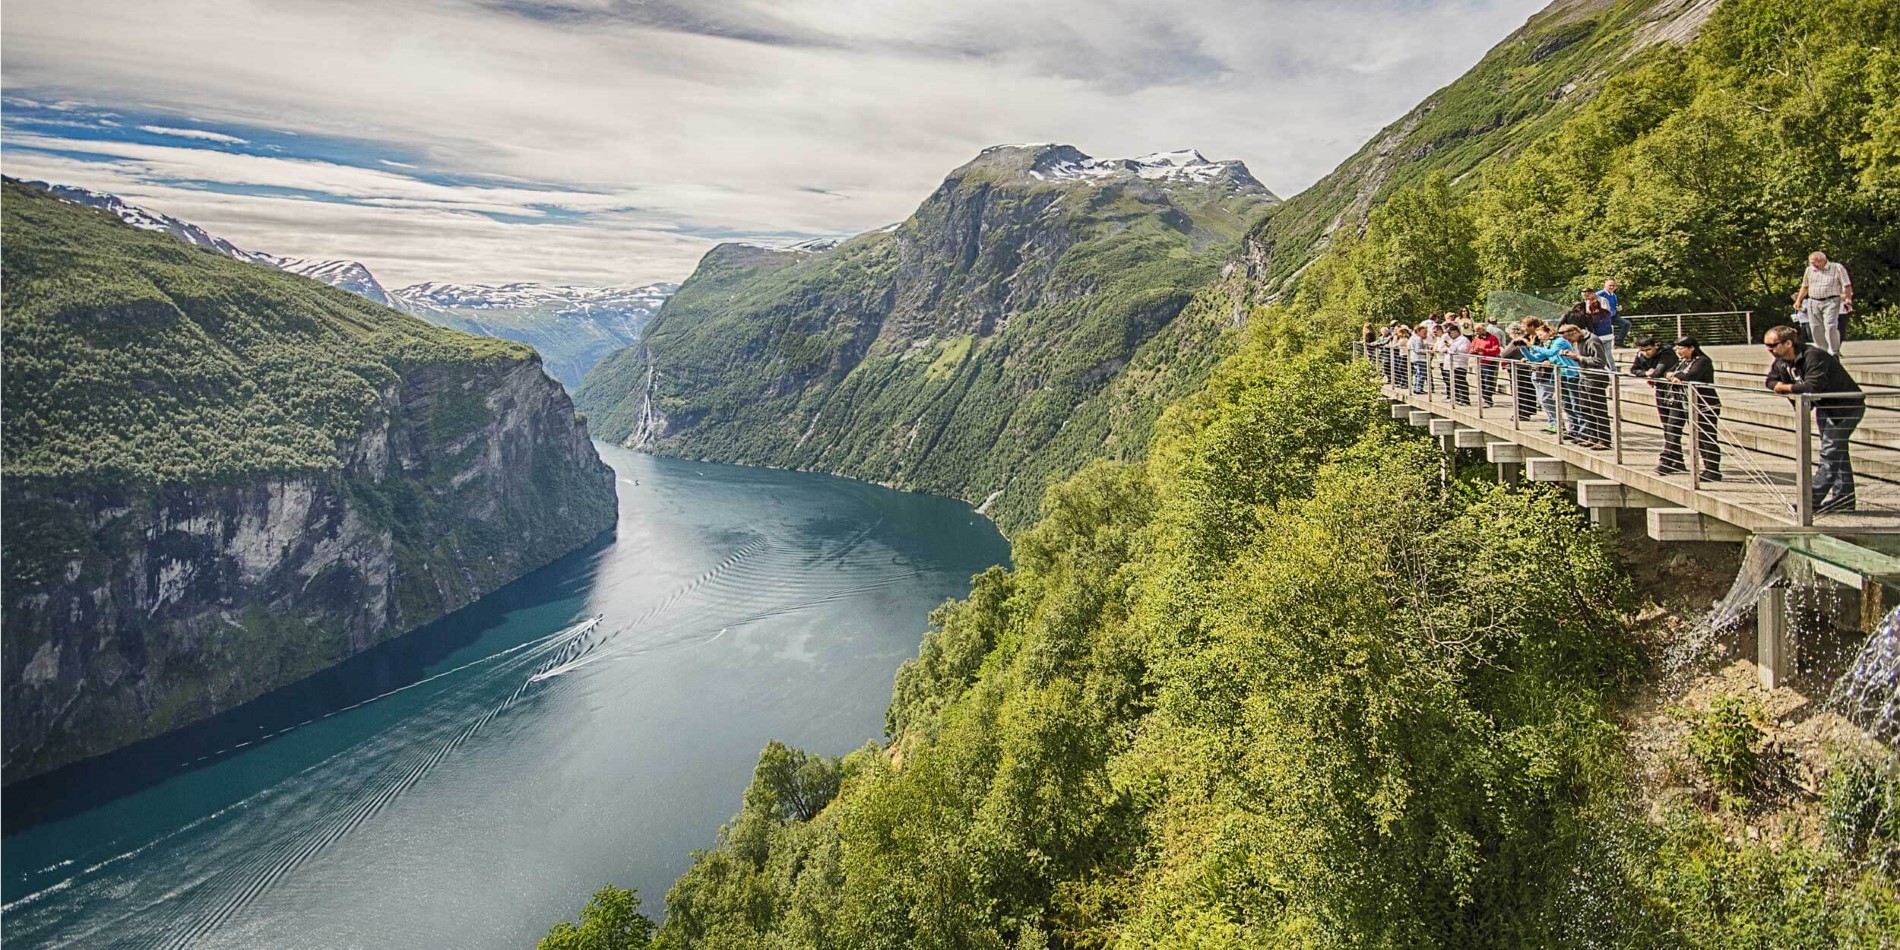 Sail with Hurtigruten in the summer months (Jun-Aug) and experience the stunning Geirangerfjord up close.